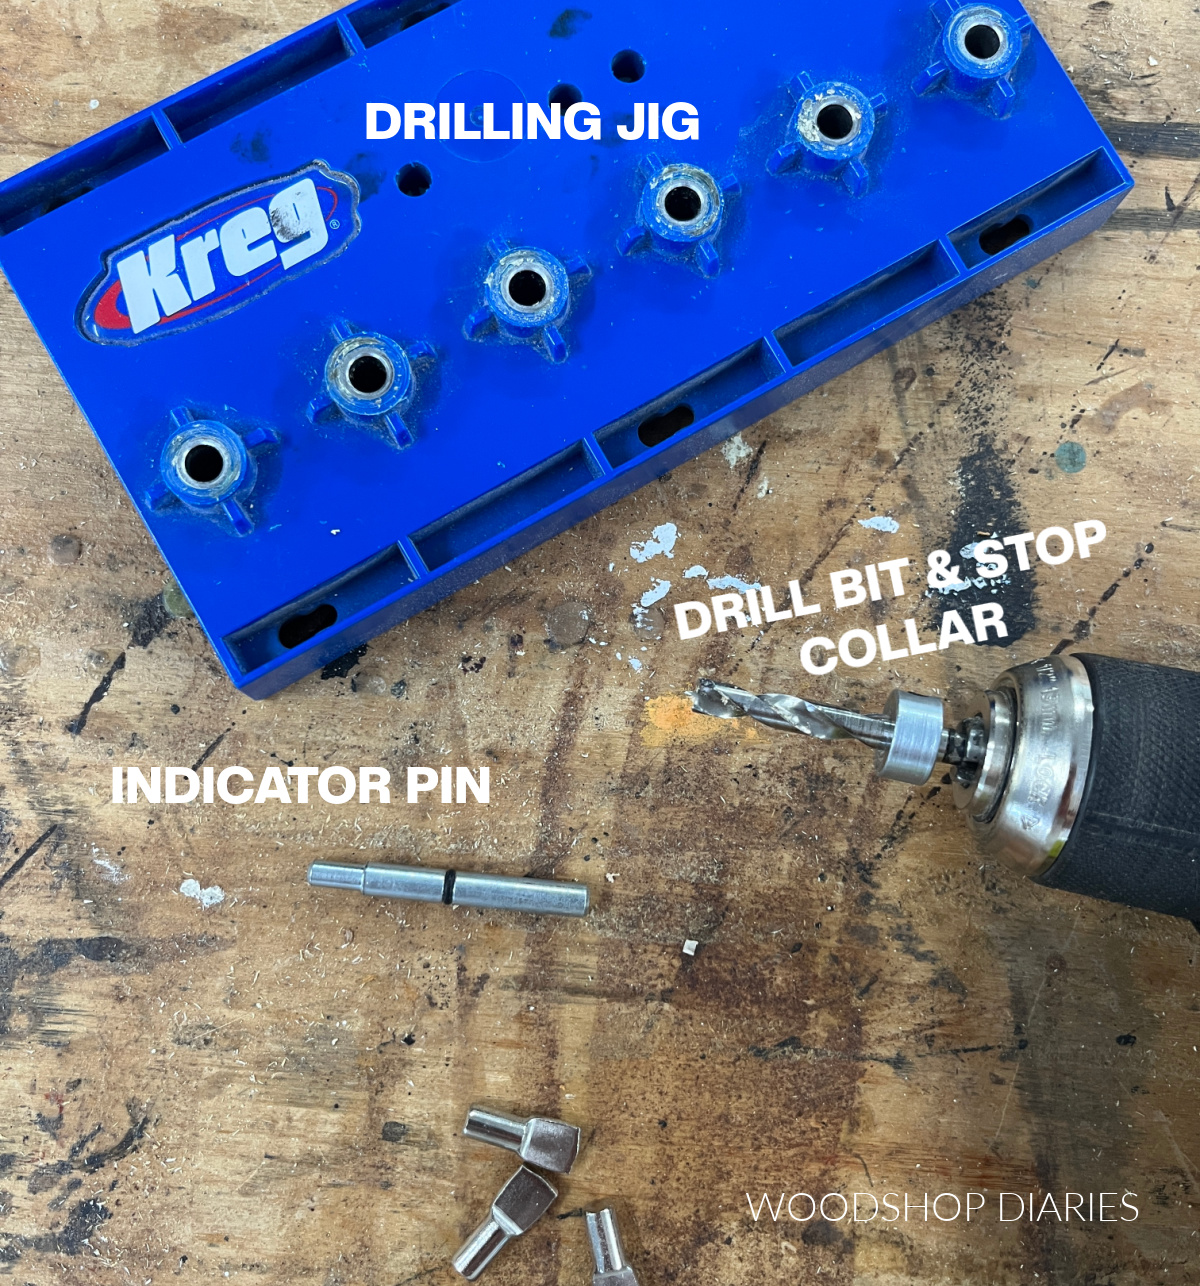 Shelf pin jig with drill bit and indicator pin labeled